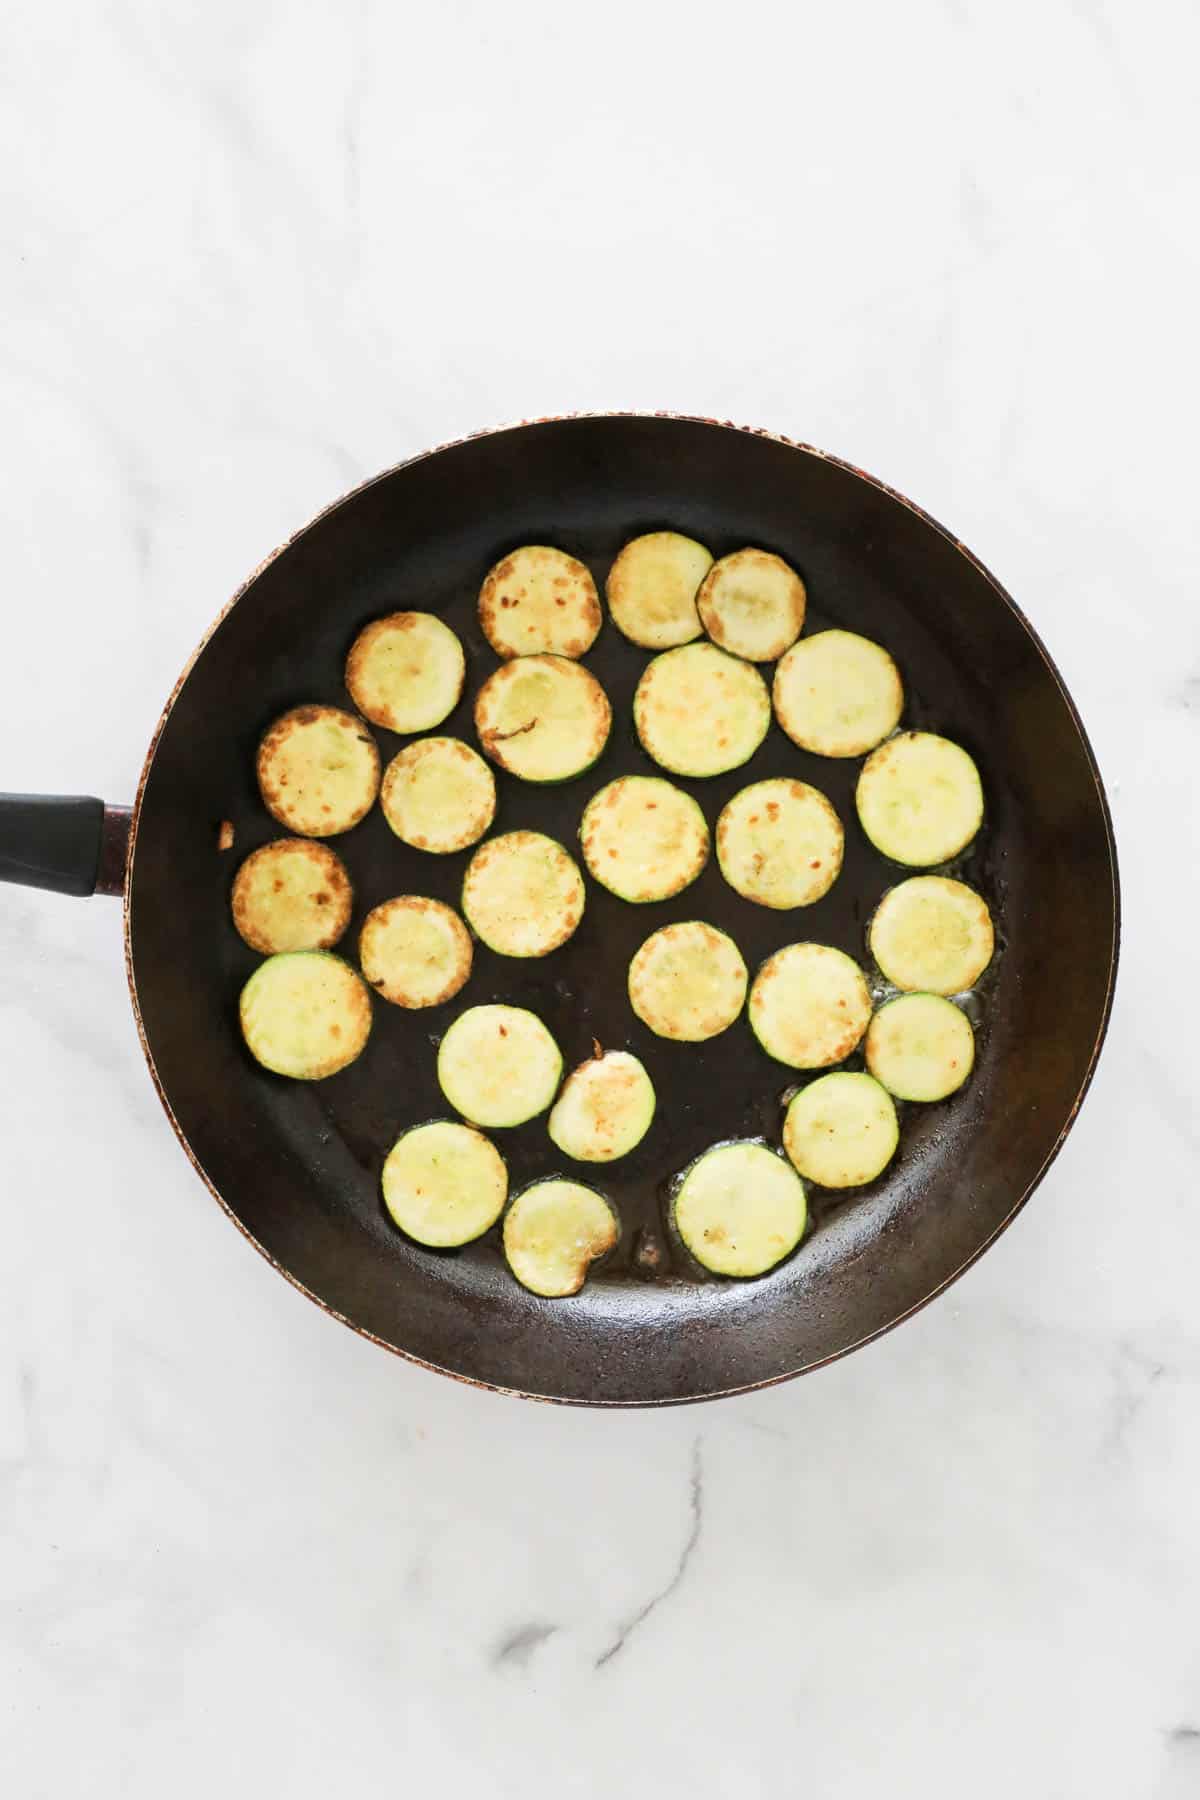 Zucchini slices in a frying pan.